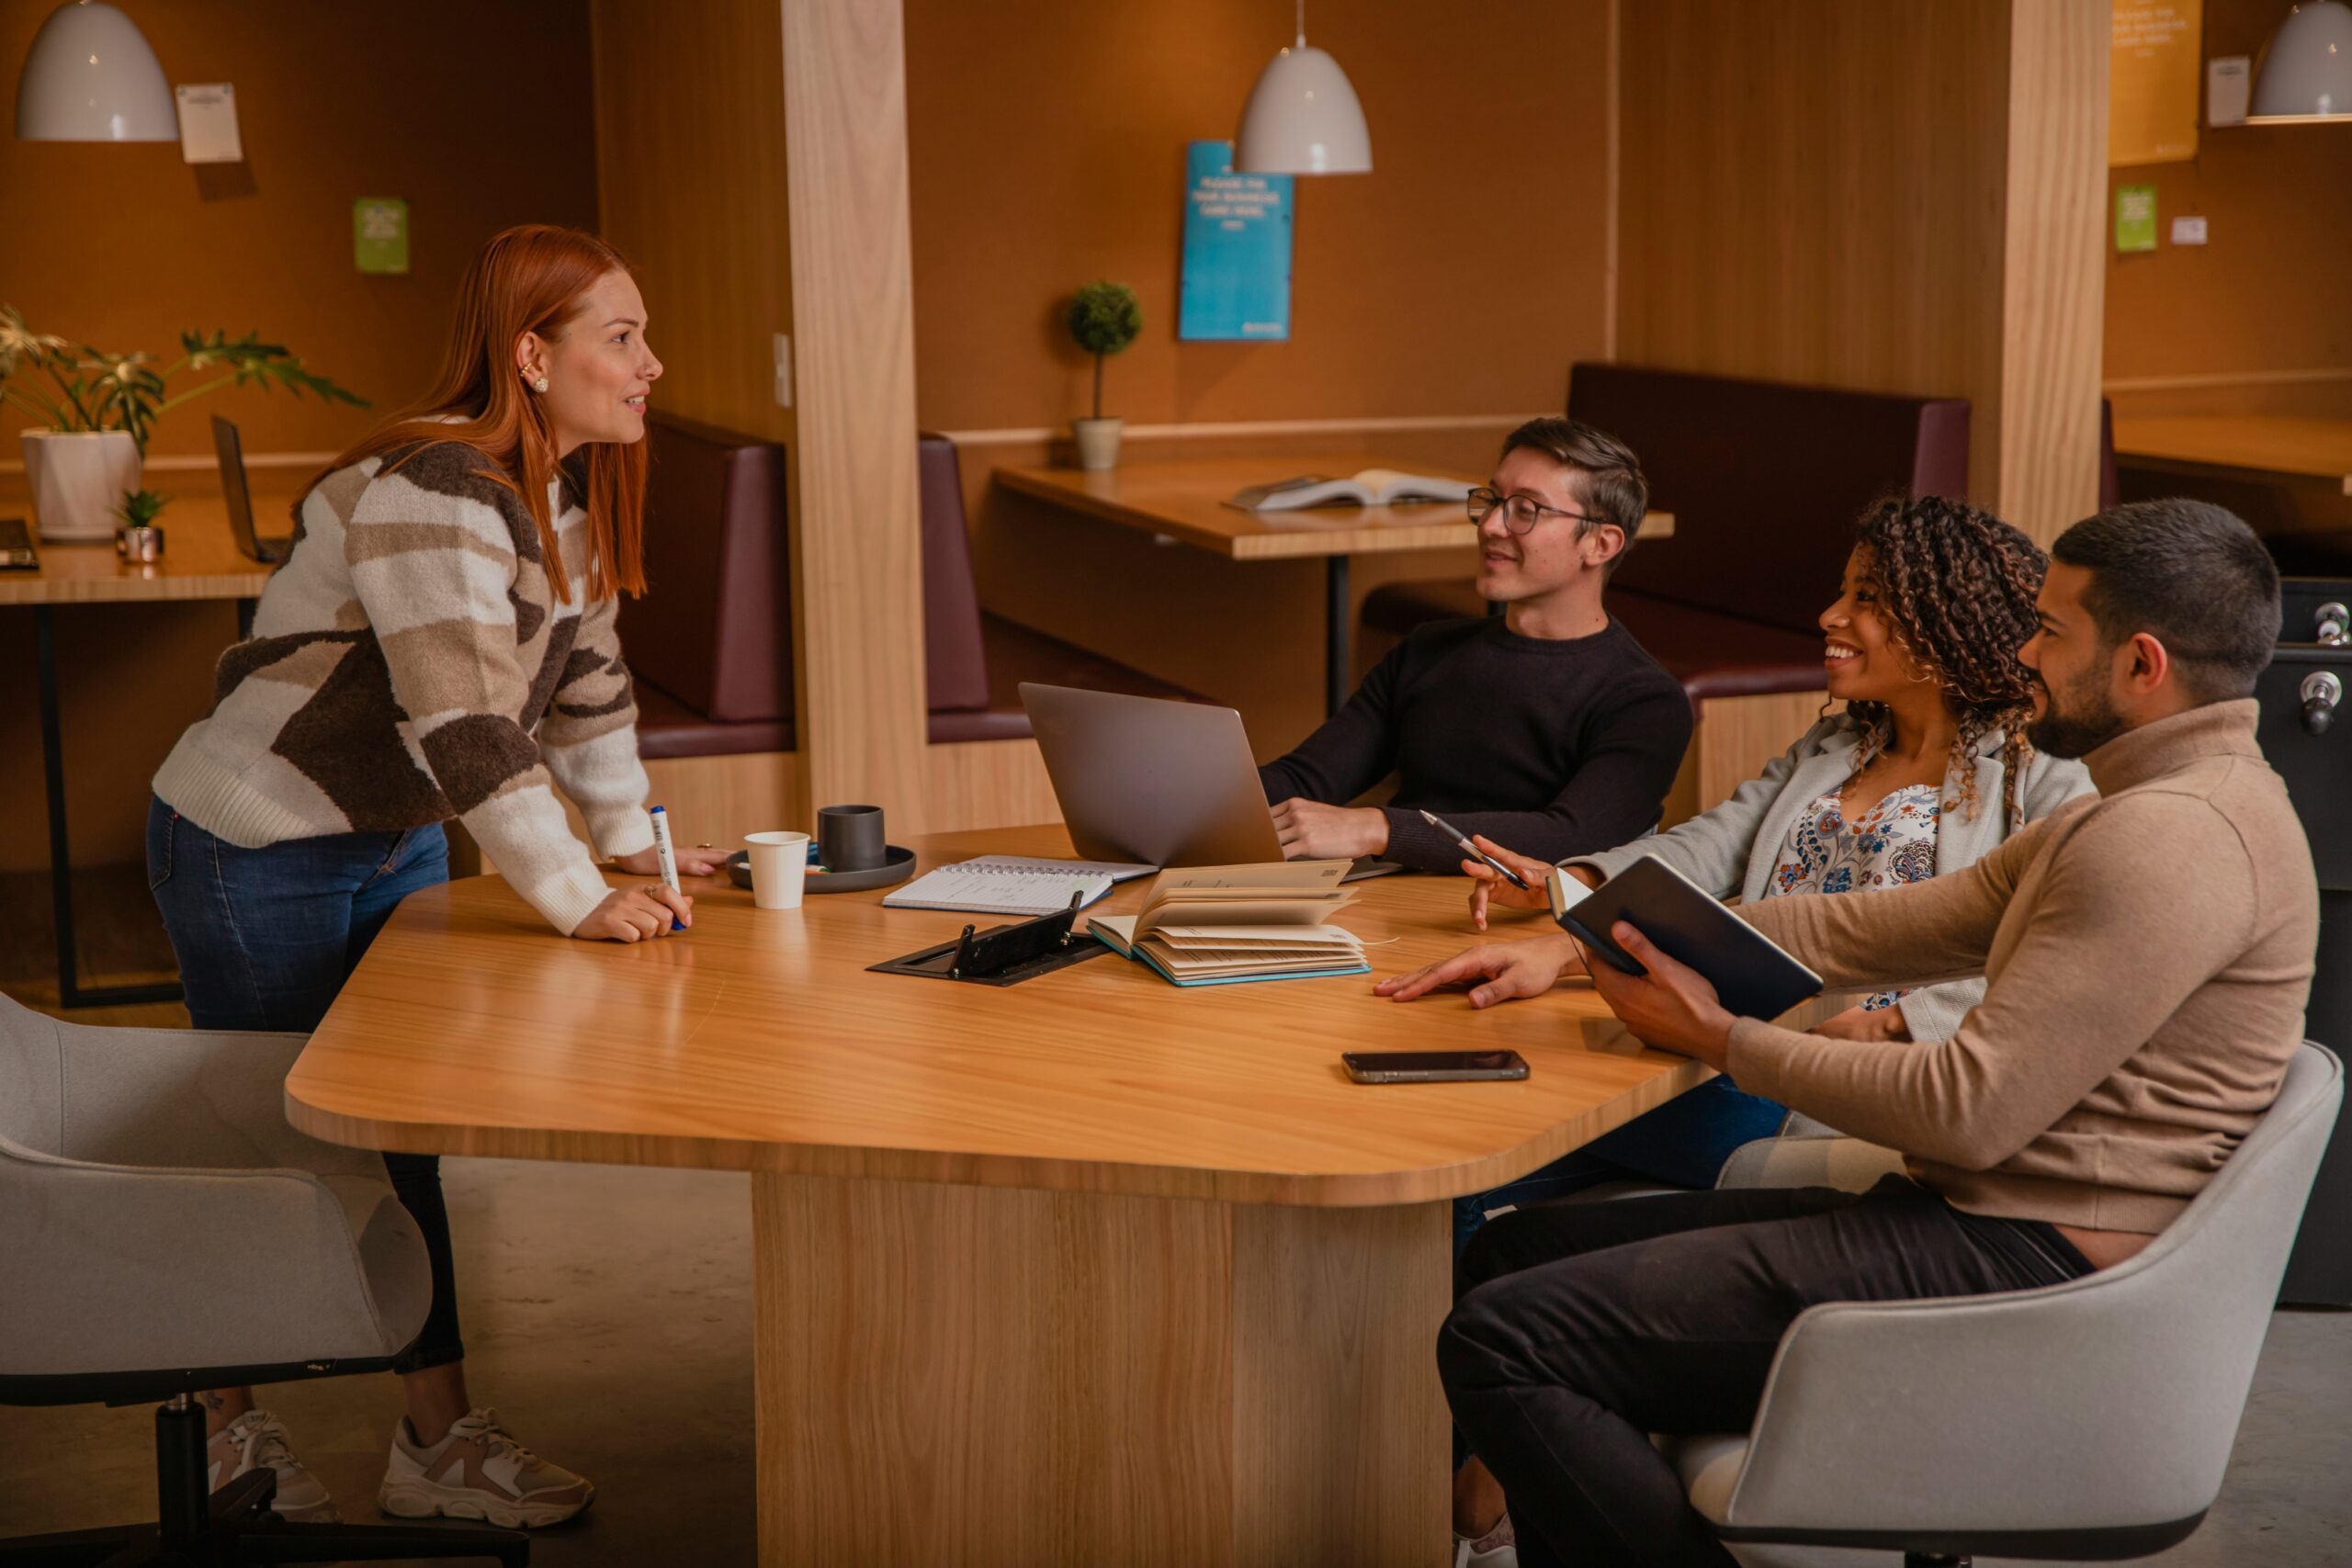 Four adults engaging in a meeting around a wooden table in a warmly lit office space, using laptops and notebooks to discuss what makes a good IT consultant.